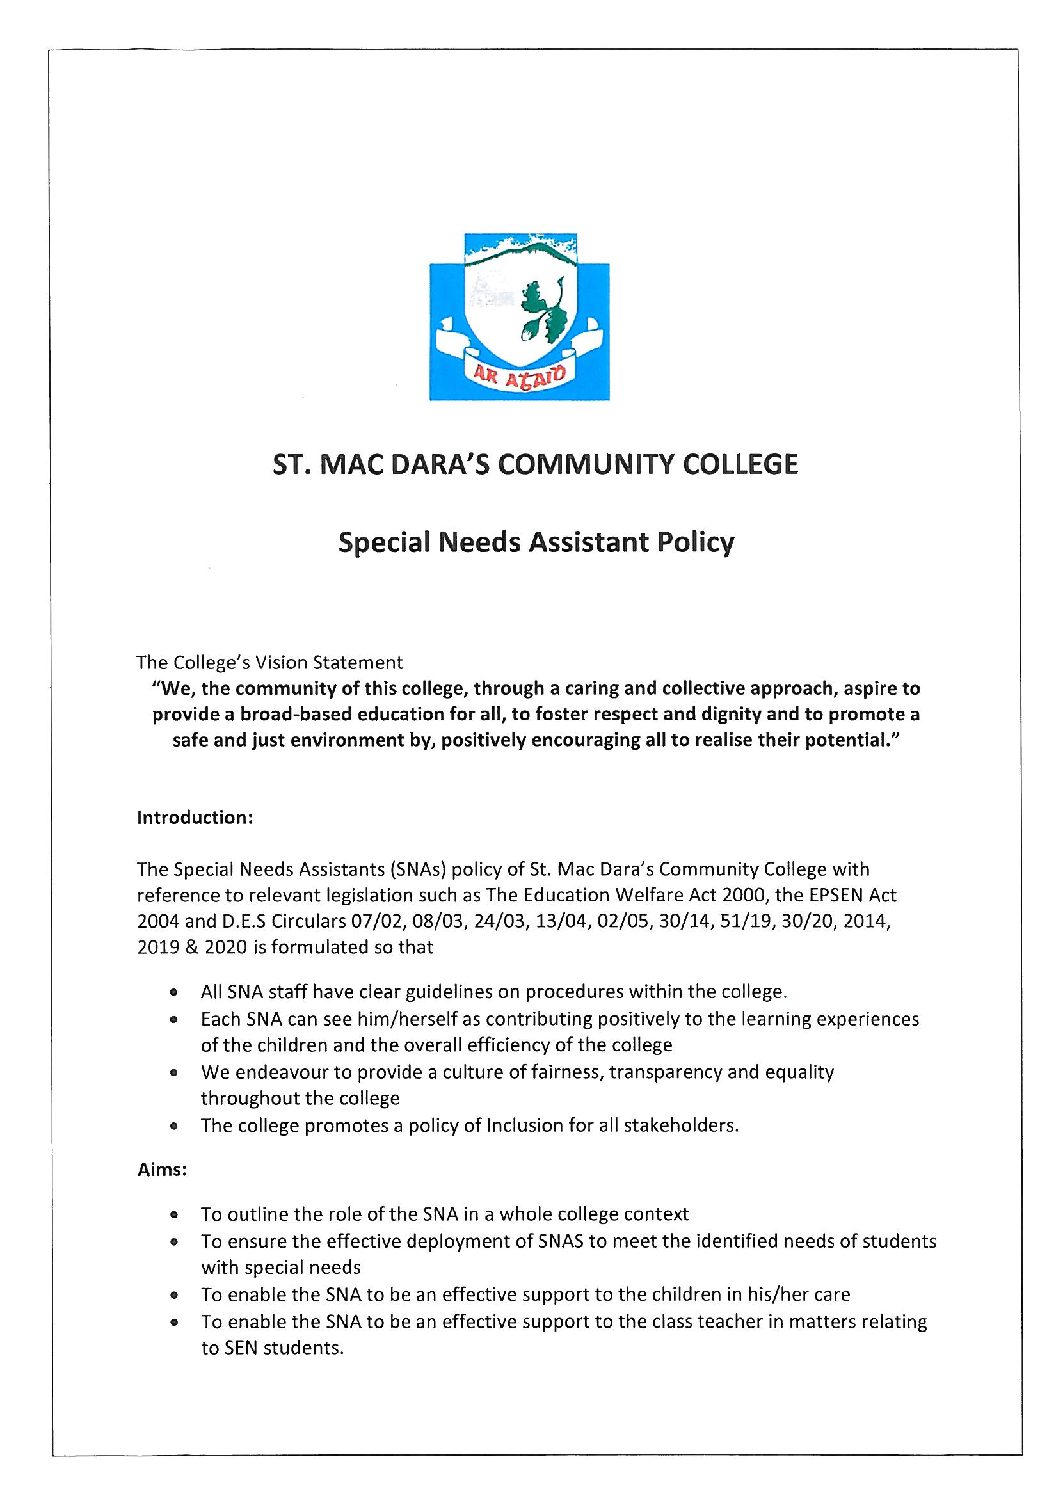 Special Needs Assistant Policy